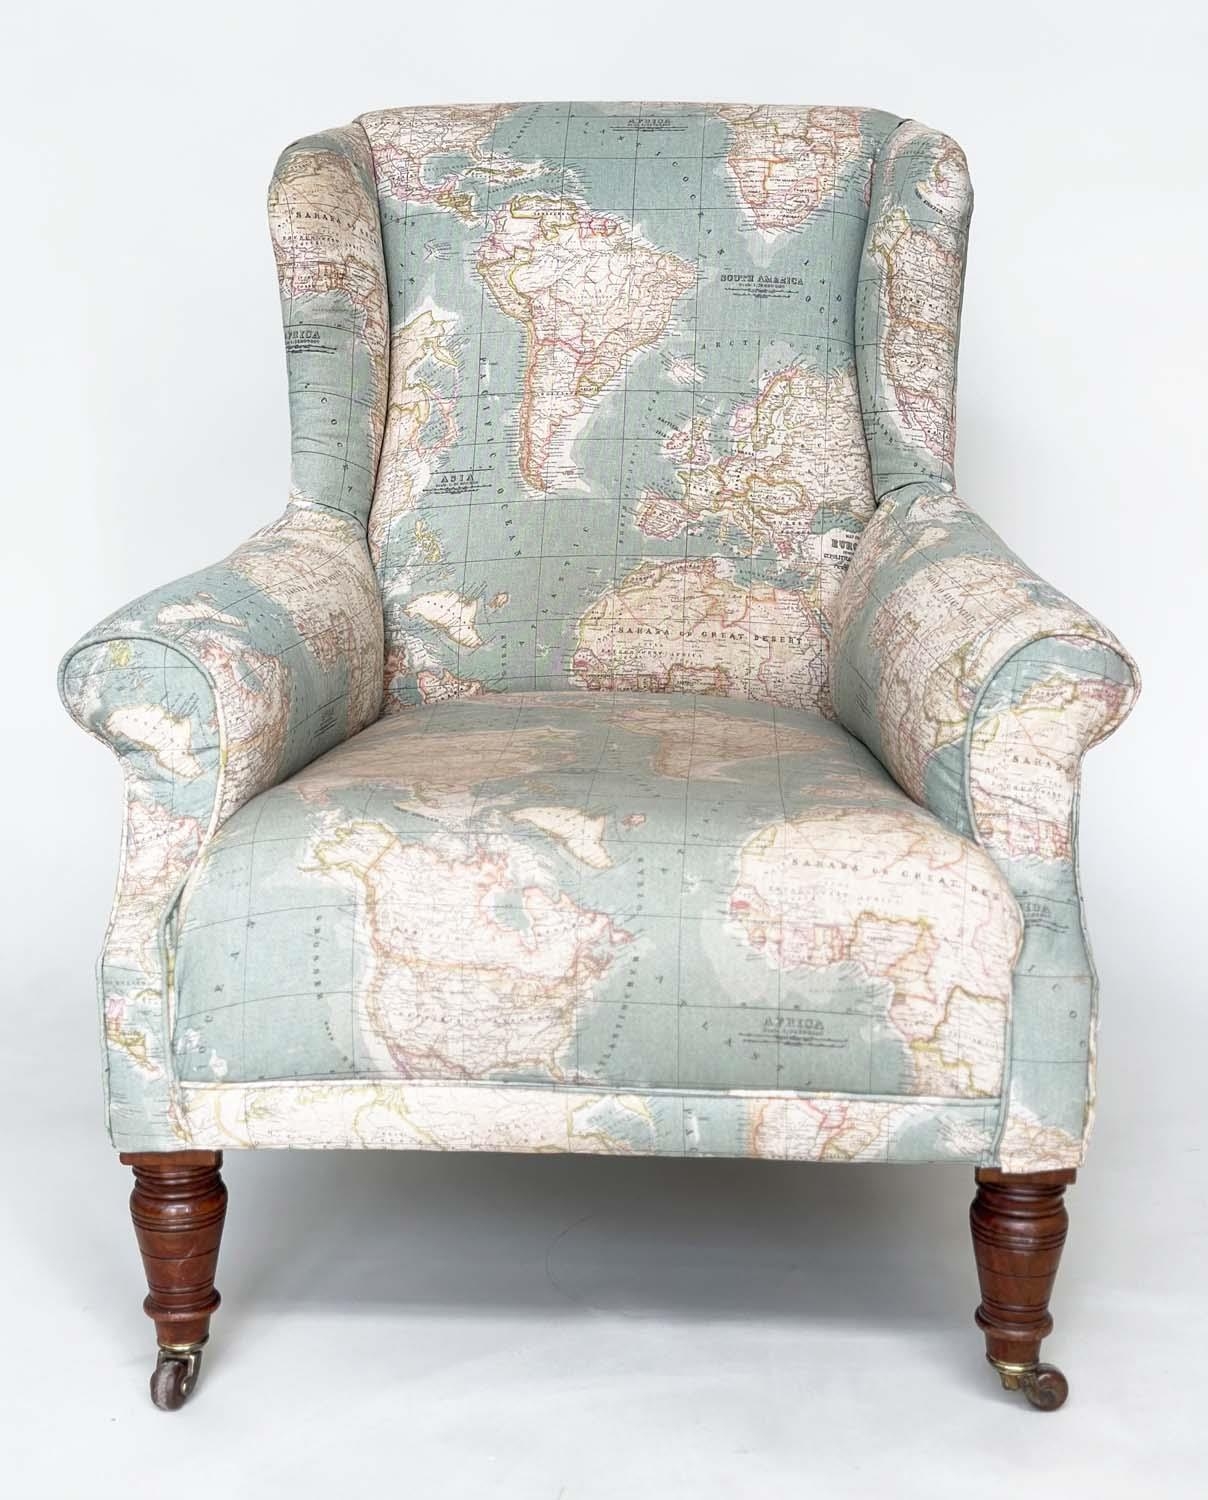 WING ARMCHAIR, Victorian walnut with circa 1900 World Atlas printed fabric upholstery scroll arms - Image 12 of 12